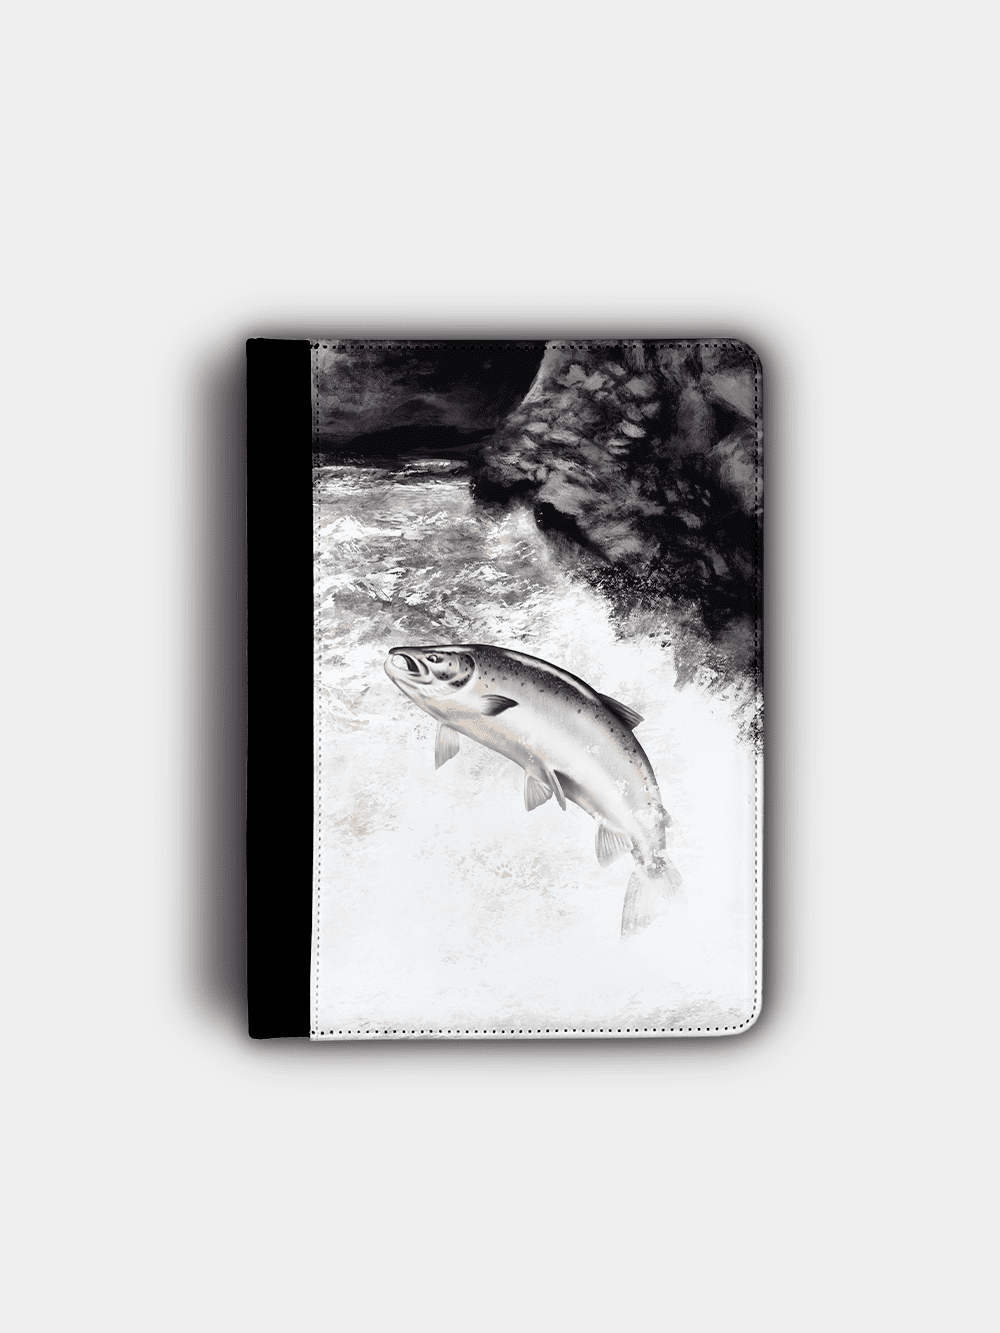 Country Images Personalised Custom Customised Flip iPad Cover Case Scotland Scottish Highlands Leaping Salmon Angling Angler Fishing Gift Gifts 2